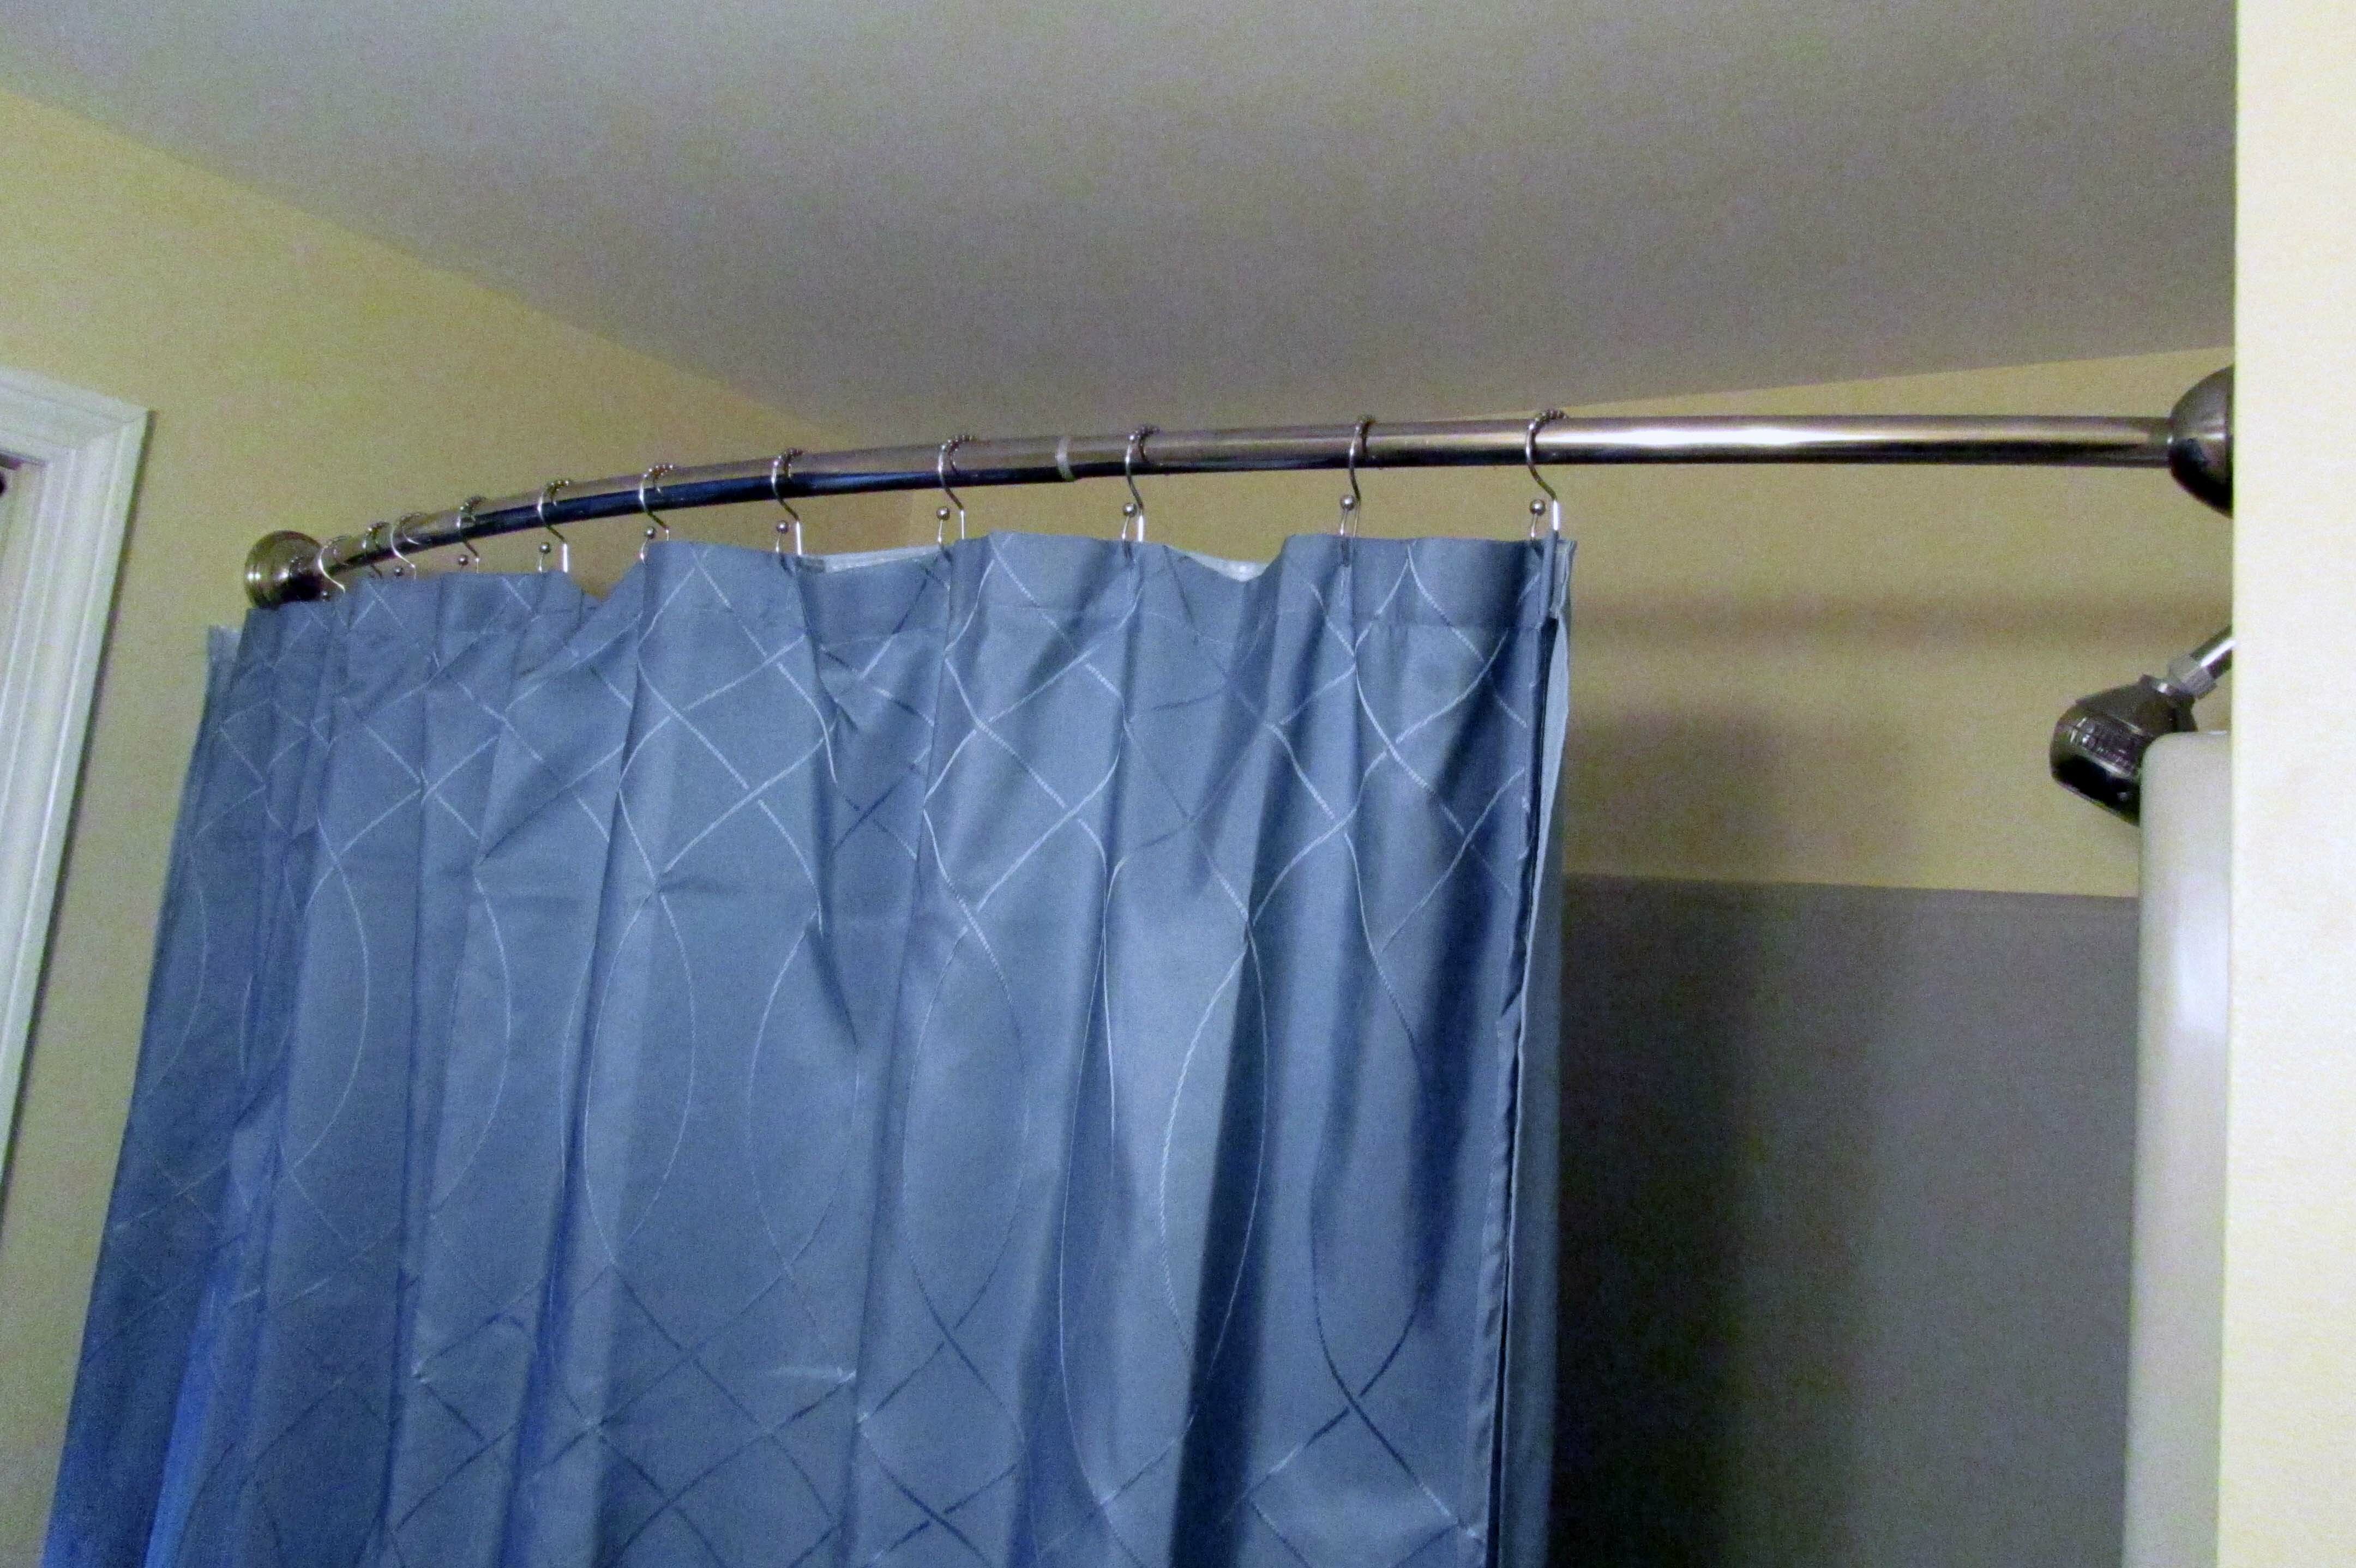 Shower Curtains Rod | Fixed Shower Curtain Rods | Shower Curtain Tension Rod